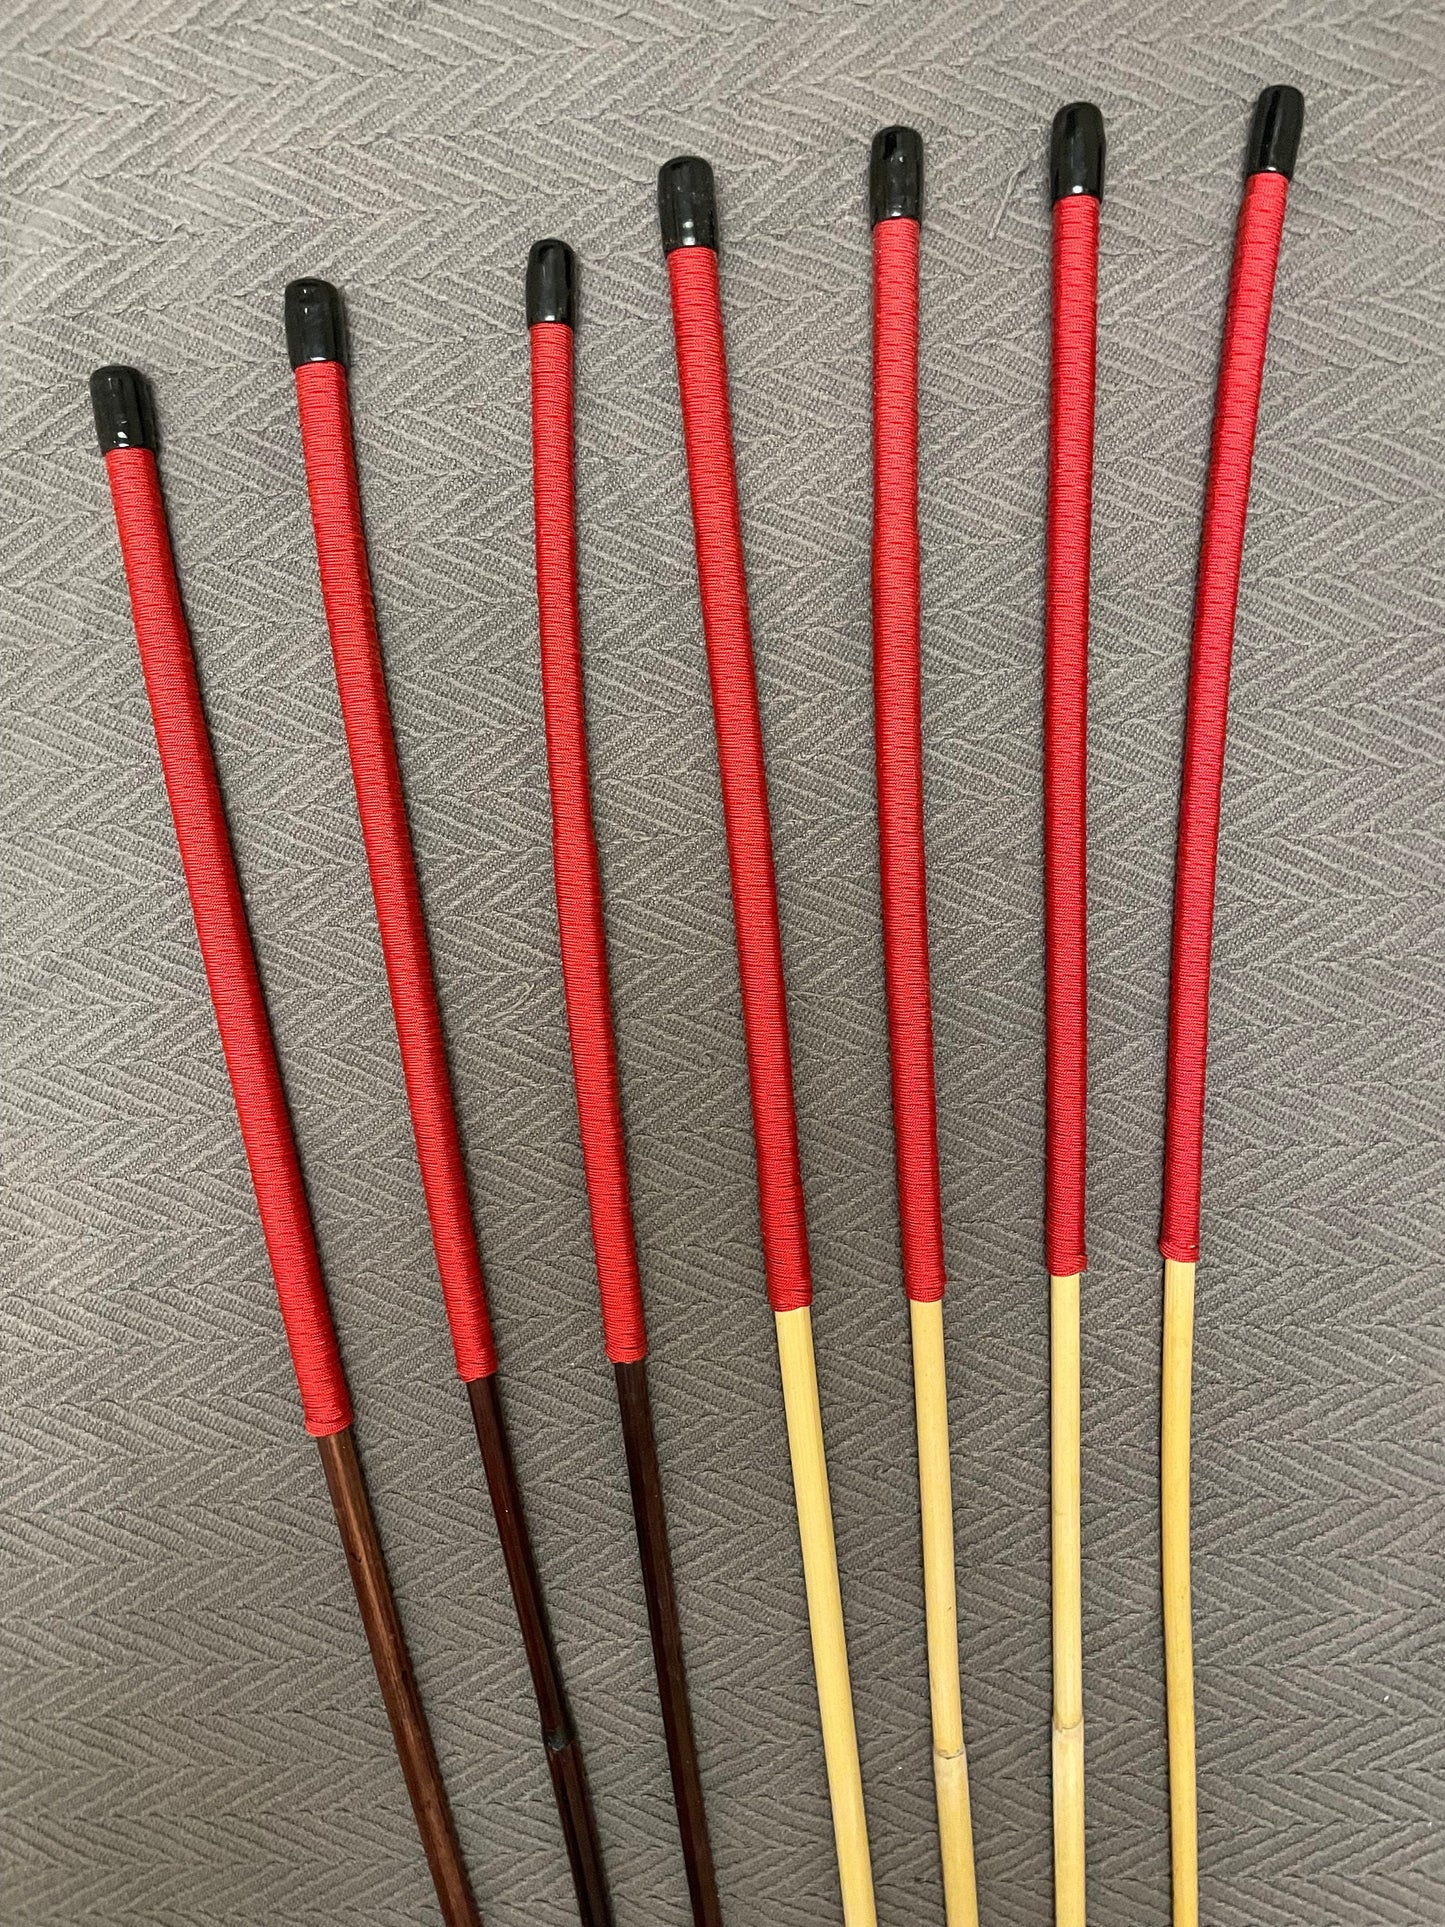 Set of 7 Classic Dragon / Smoked Dragon Canes -  95 cms Length - Imperial Red Paracord Handles